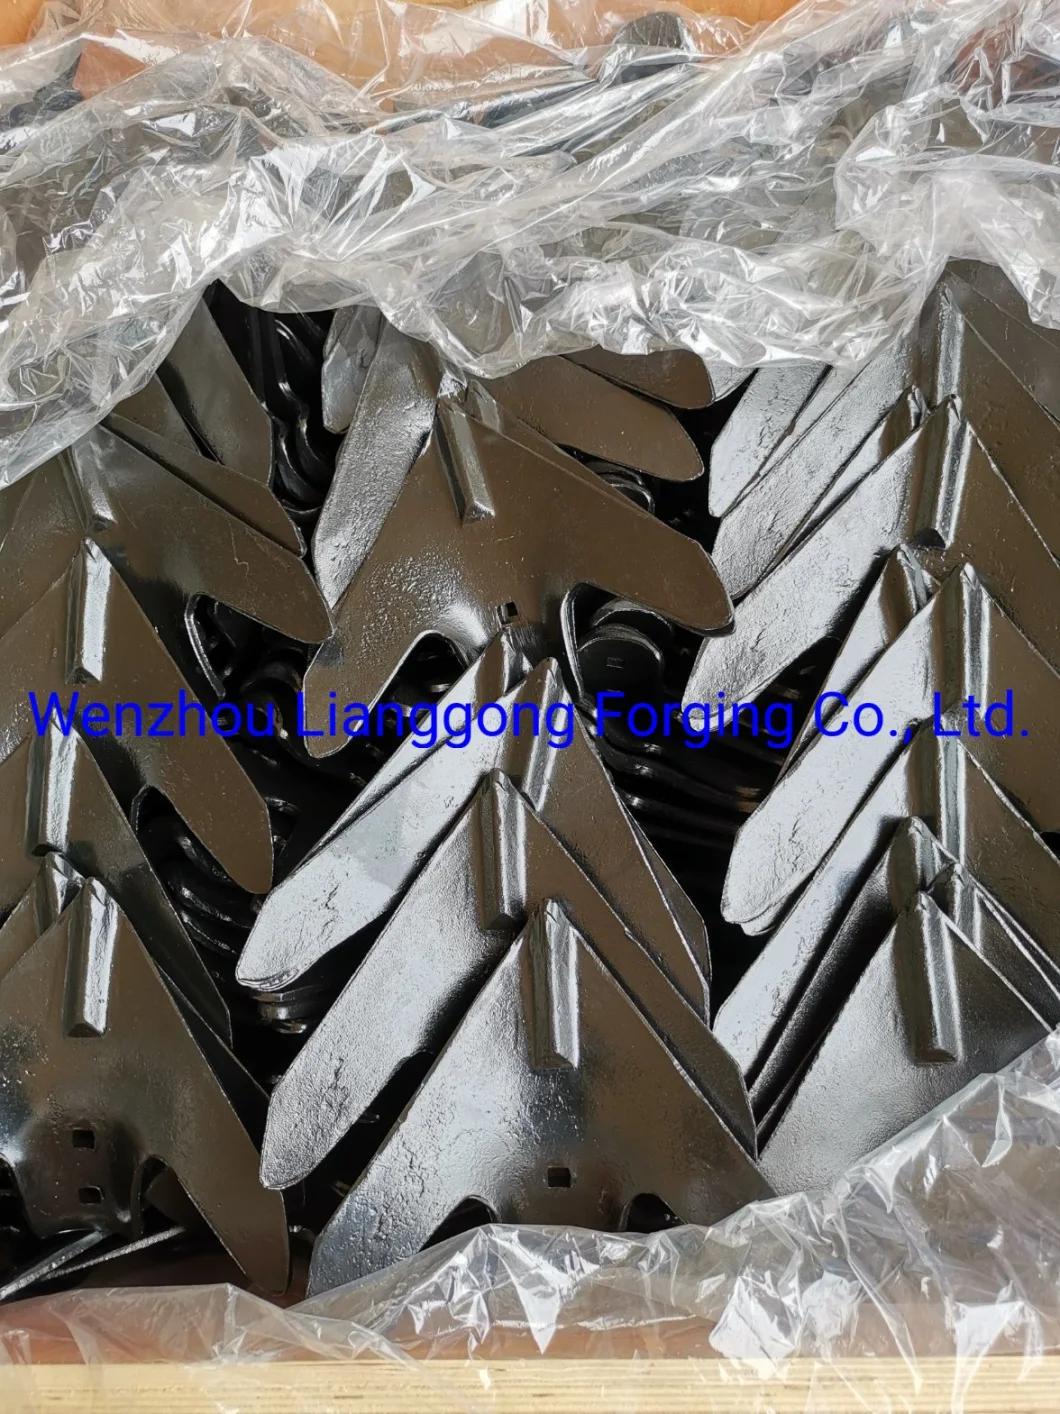 Customized Hot Open Die Forged Metal Part in Construction Machinery/Agricultural Machinery